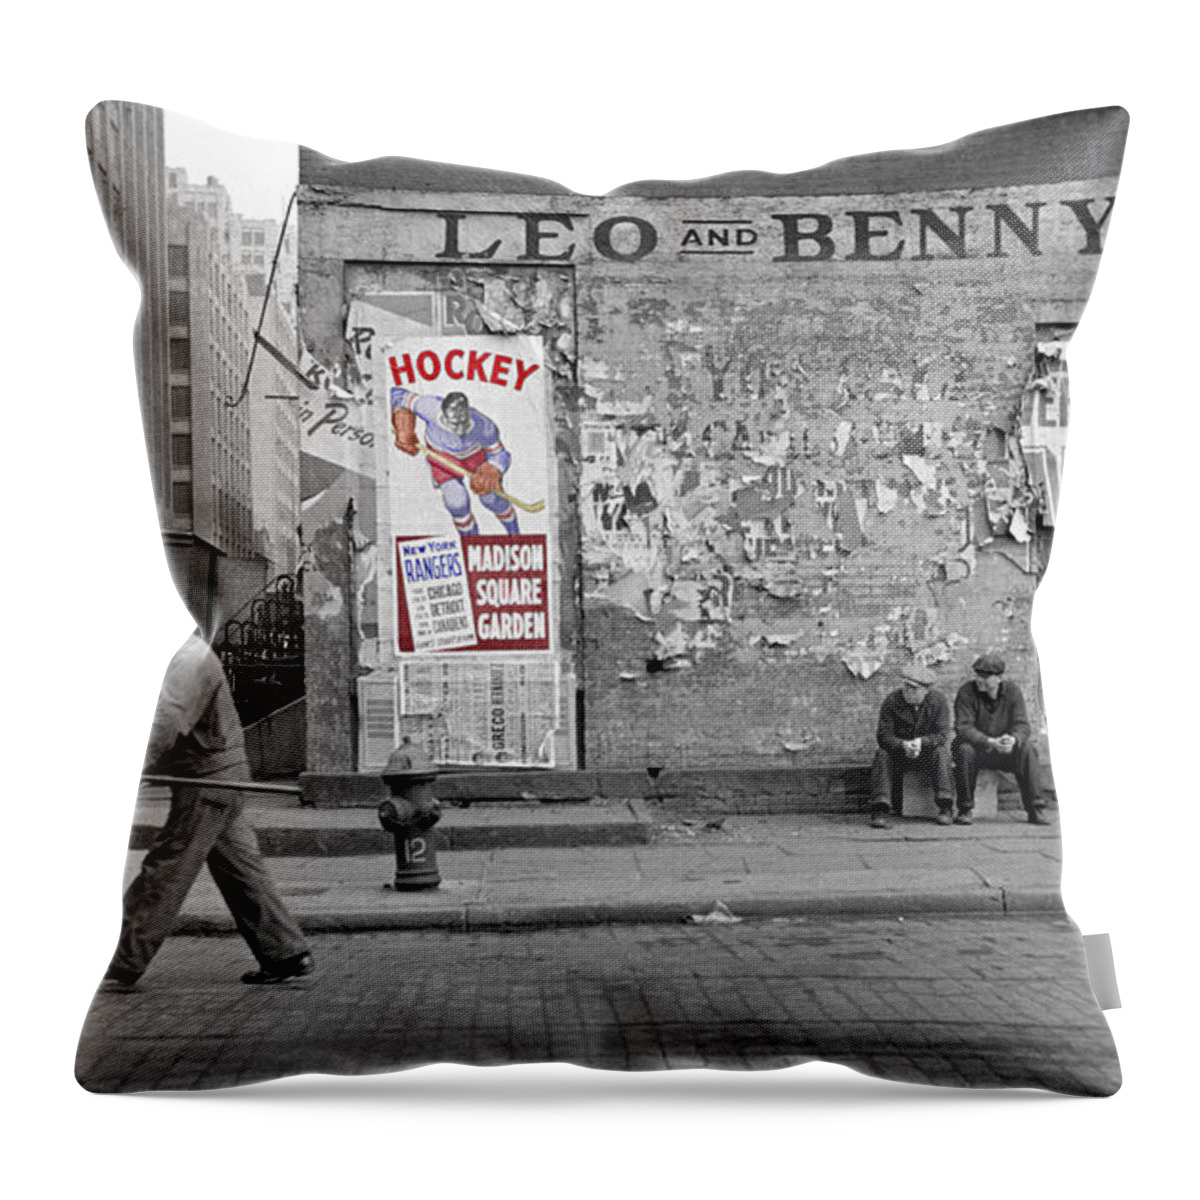 Hockey Throw Pillow featuring the photograph Vintage Hockey Poster by Andrew Fare